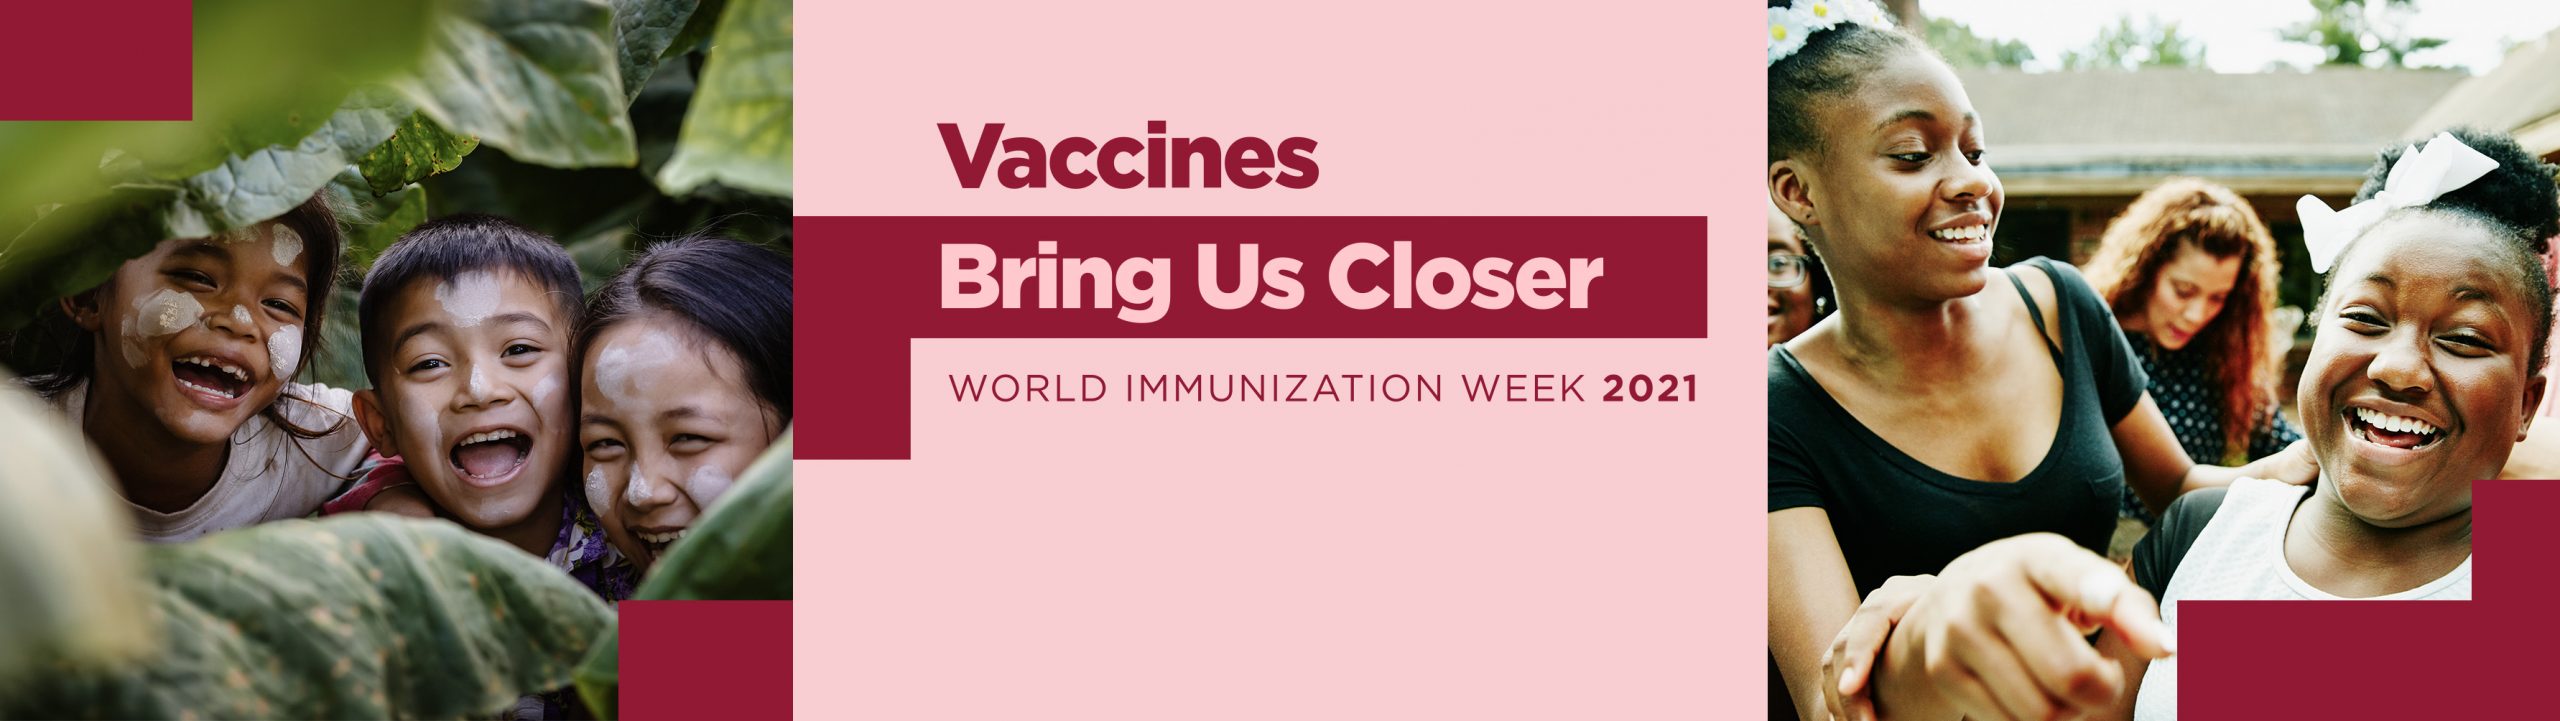 Vaccines bring us closer - who